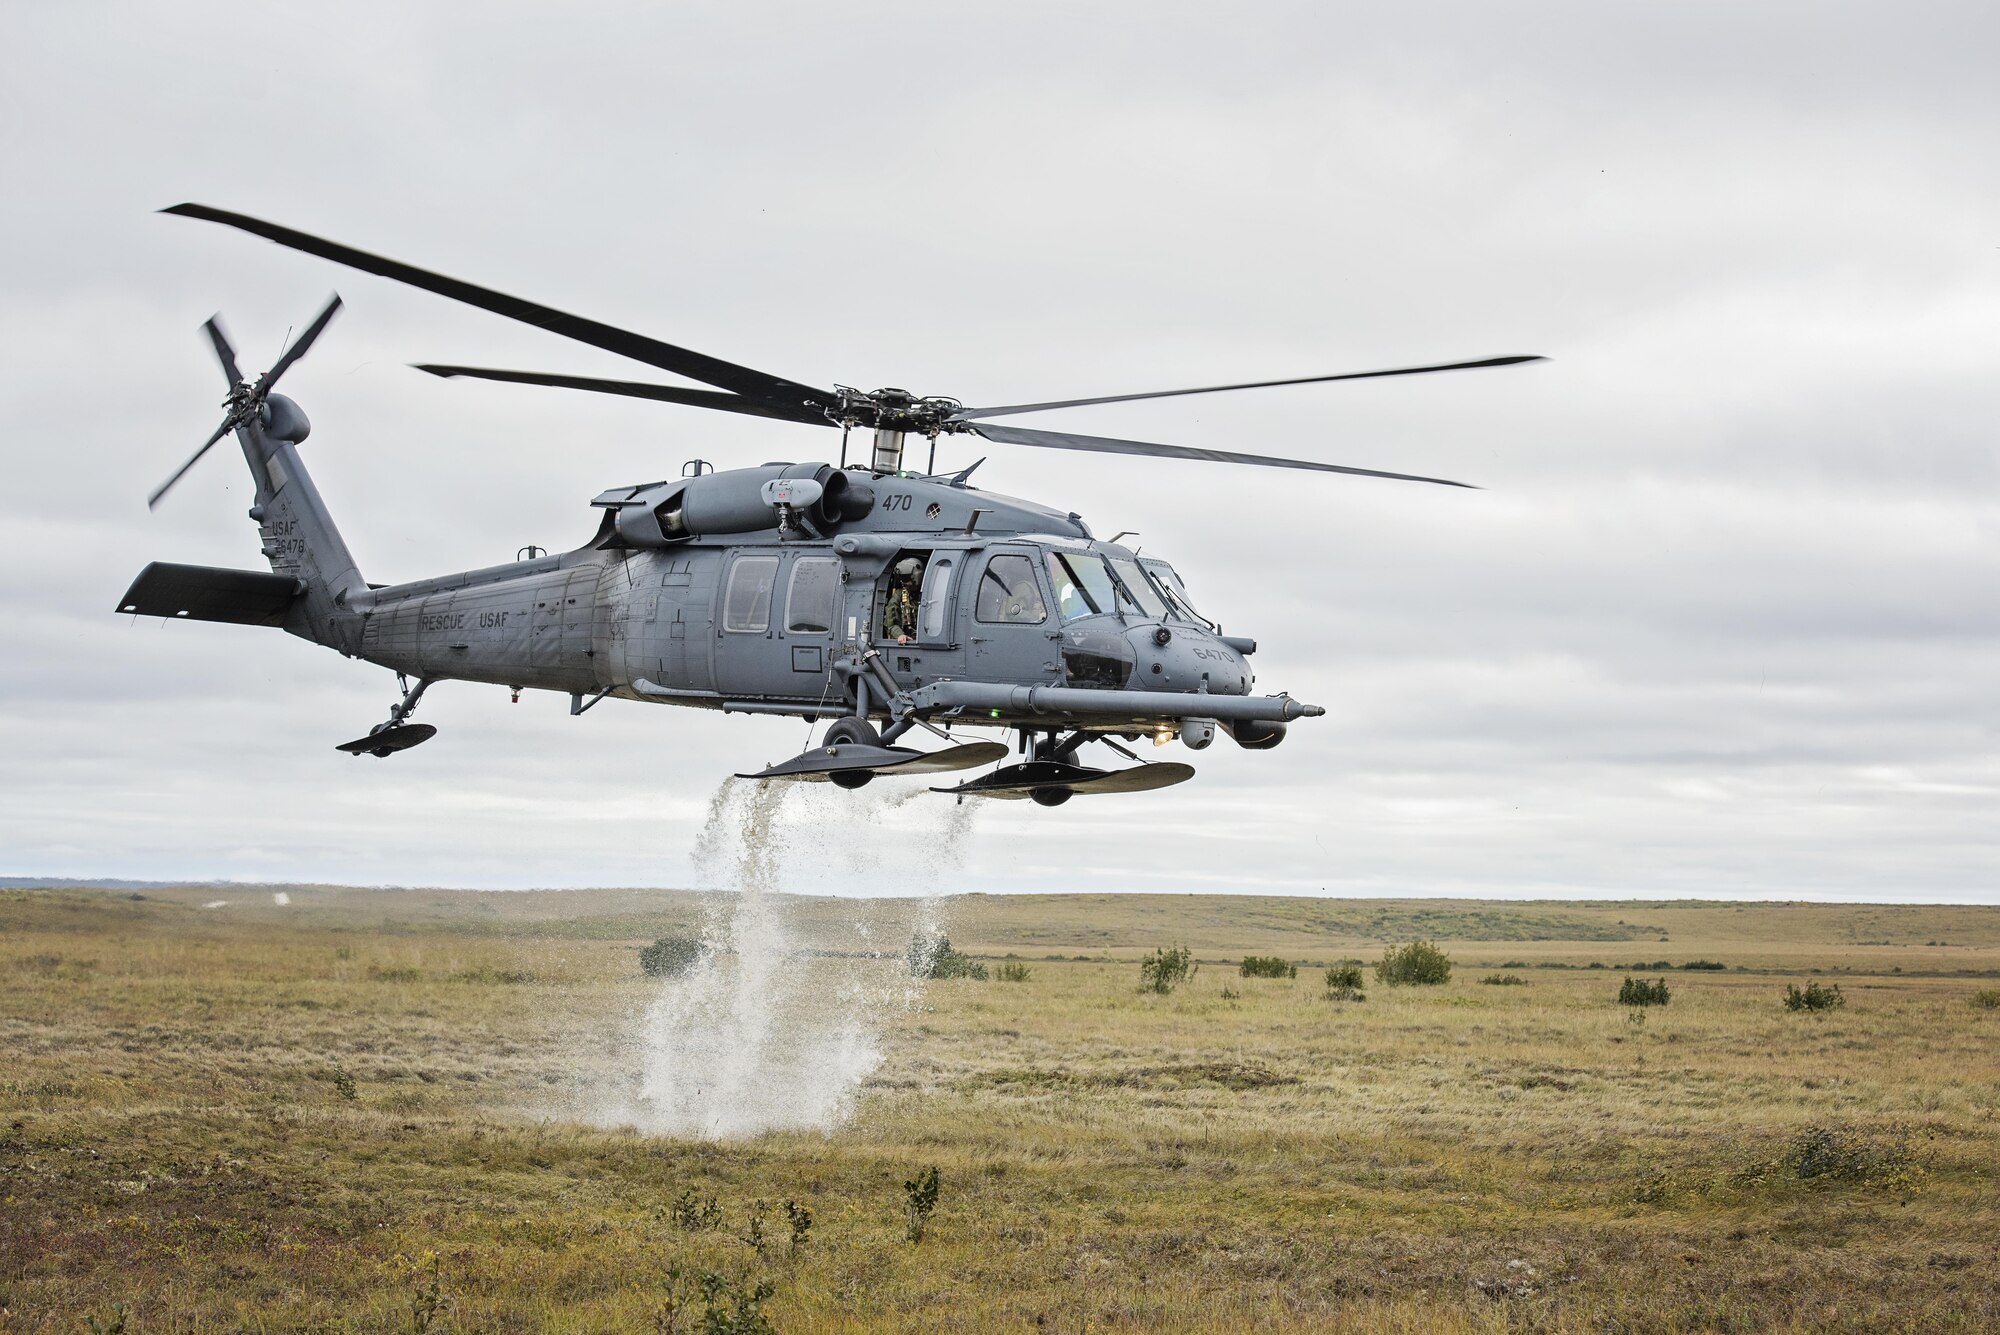 An HH-60 Pave Hawk helicopter from the 210th Rescue Squadron takes off after loading simulated casualties during exercise Arctic Chinook near Kotzebue, Alaska, Aug. 24, 2016. Arctic Chinook is a joint U.S. Coast Guard and U.S. Northern Command sponsored exercise, which focuses on multinational search and rescue readiness to respond to a mass rescue operation requirement in the Arctic. (U.S. Air National Guard photo/Staff Sgt. Edward Eagerton)